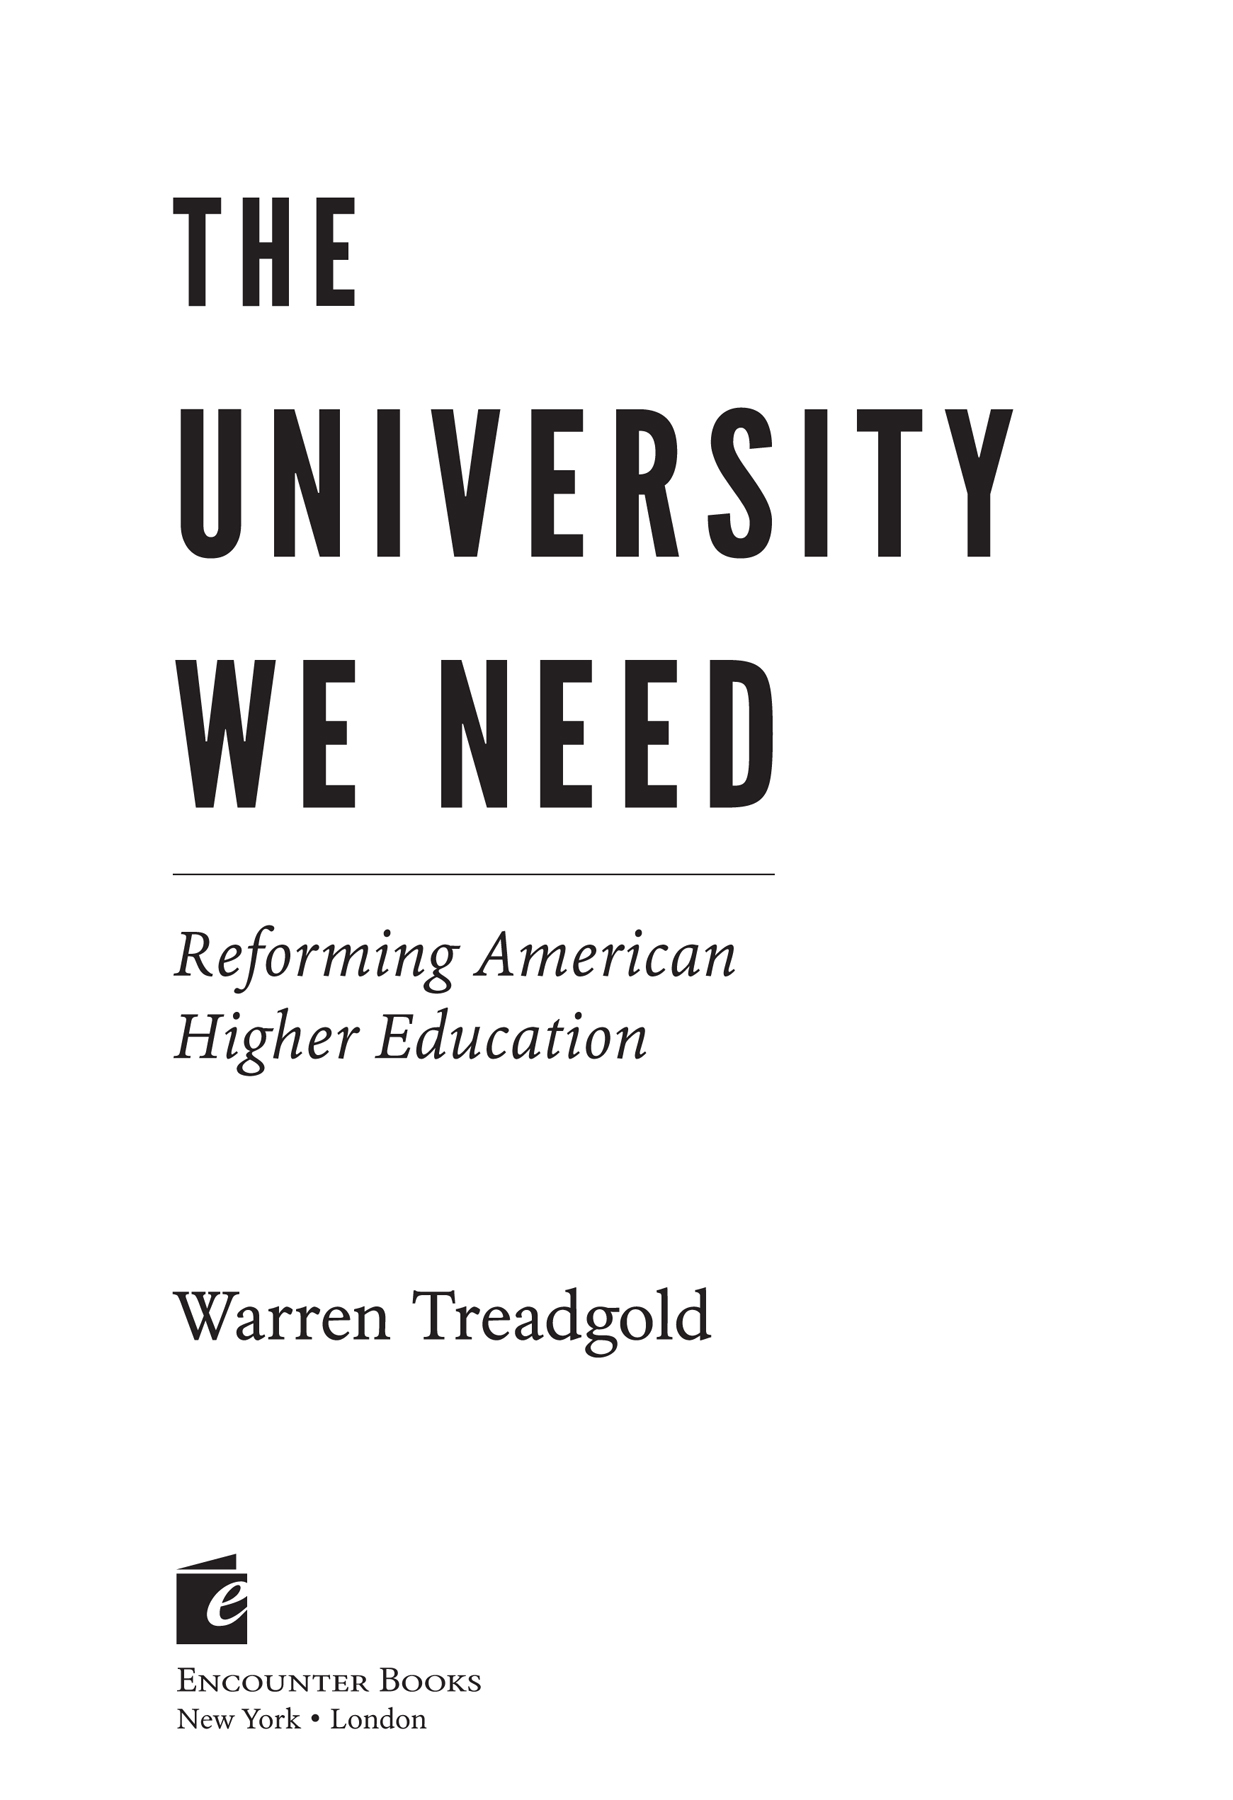 The University We Need Reforming American Higher Education - image 3